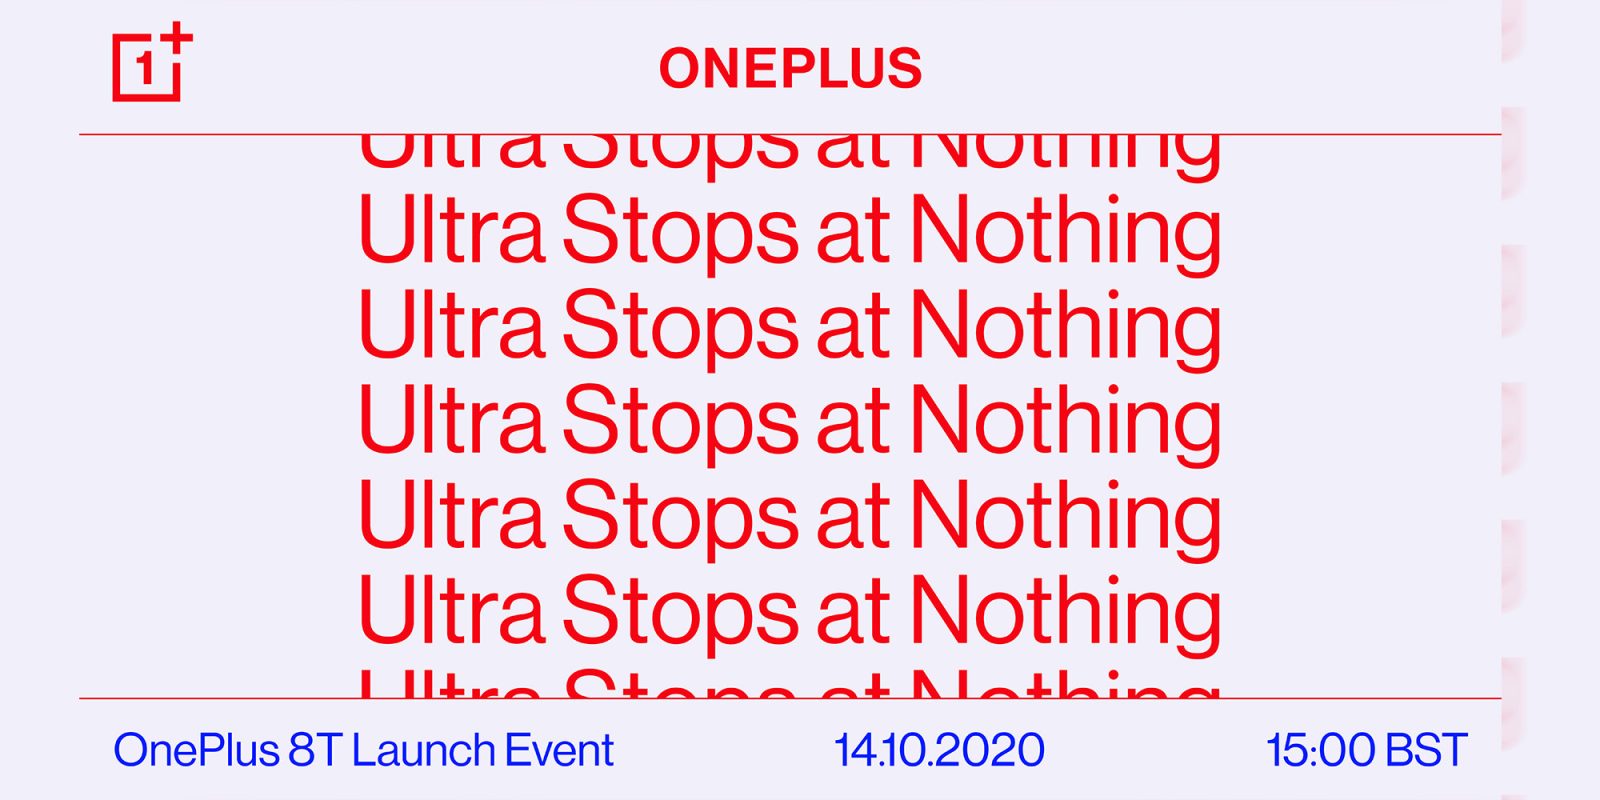 oneplus 8t launch